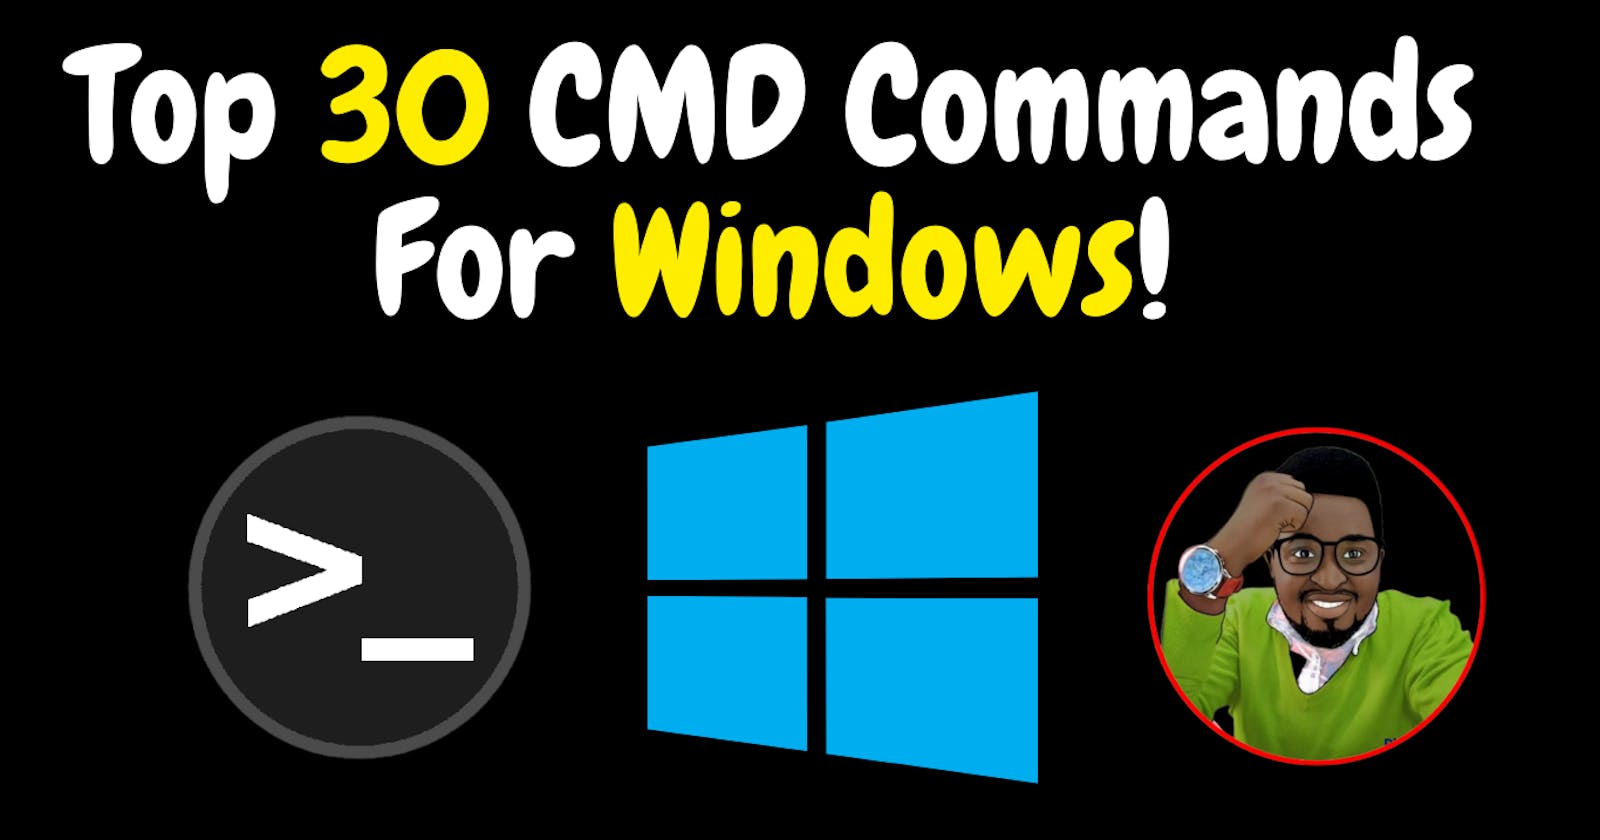 Top 30 CMD Commands For Windows